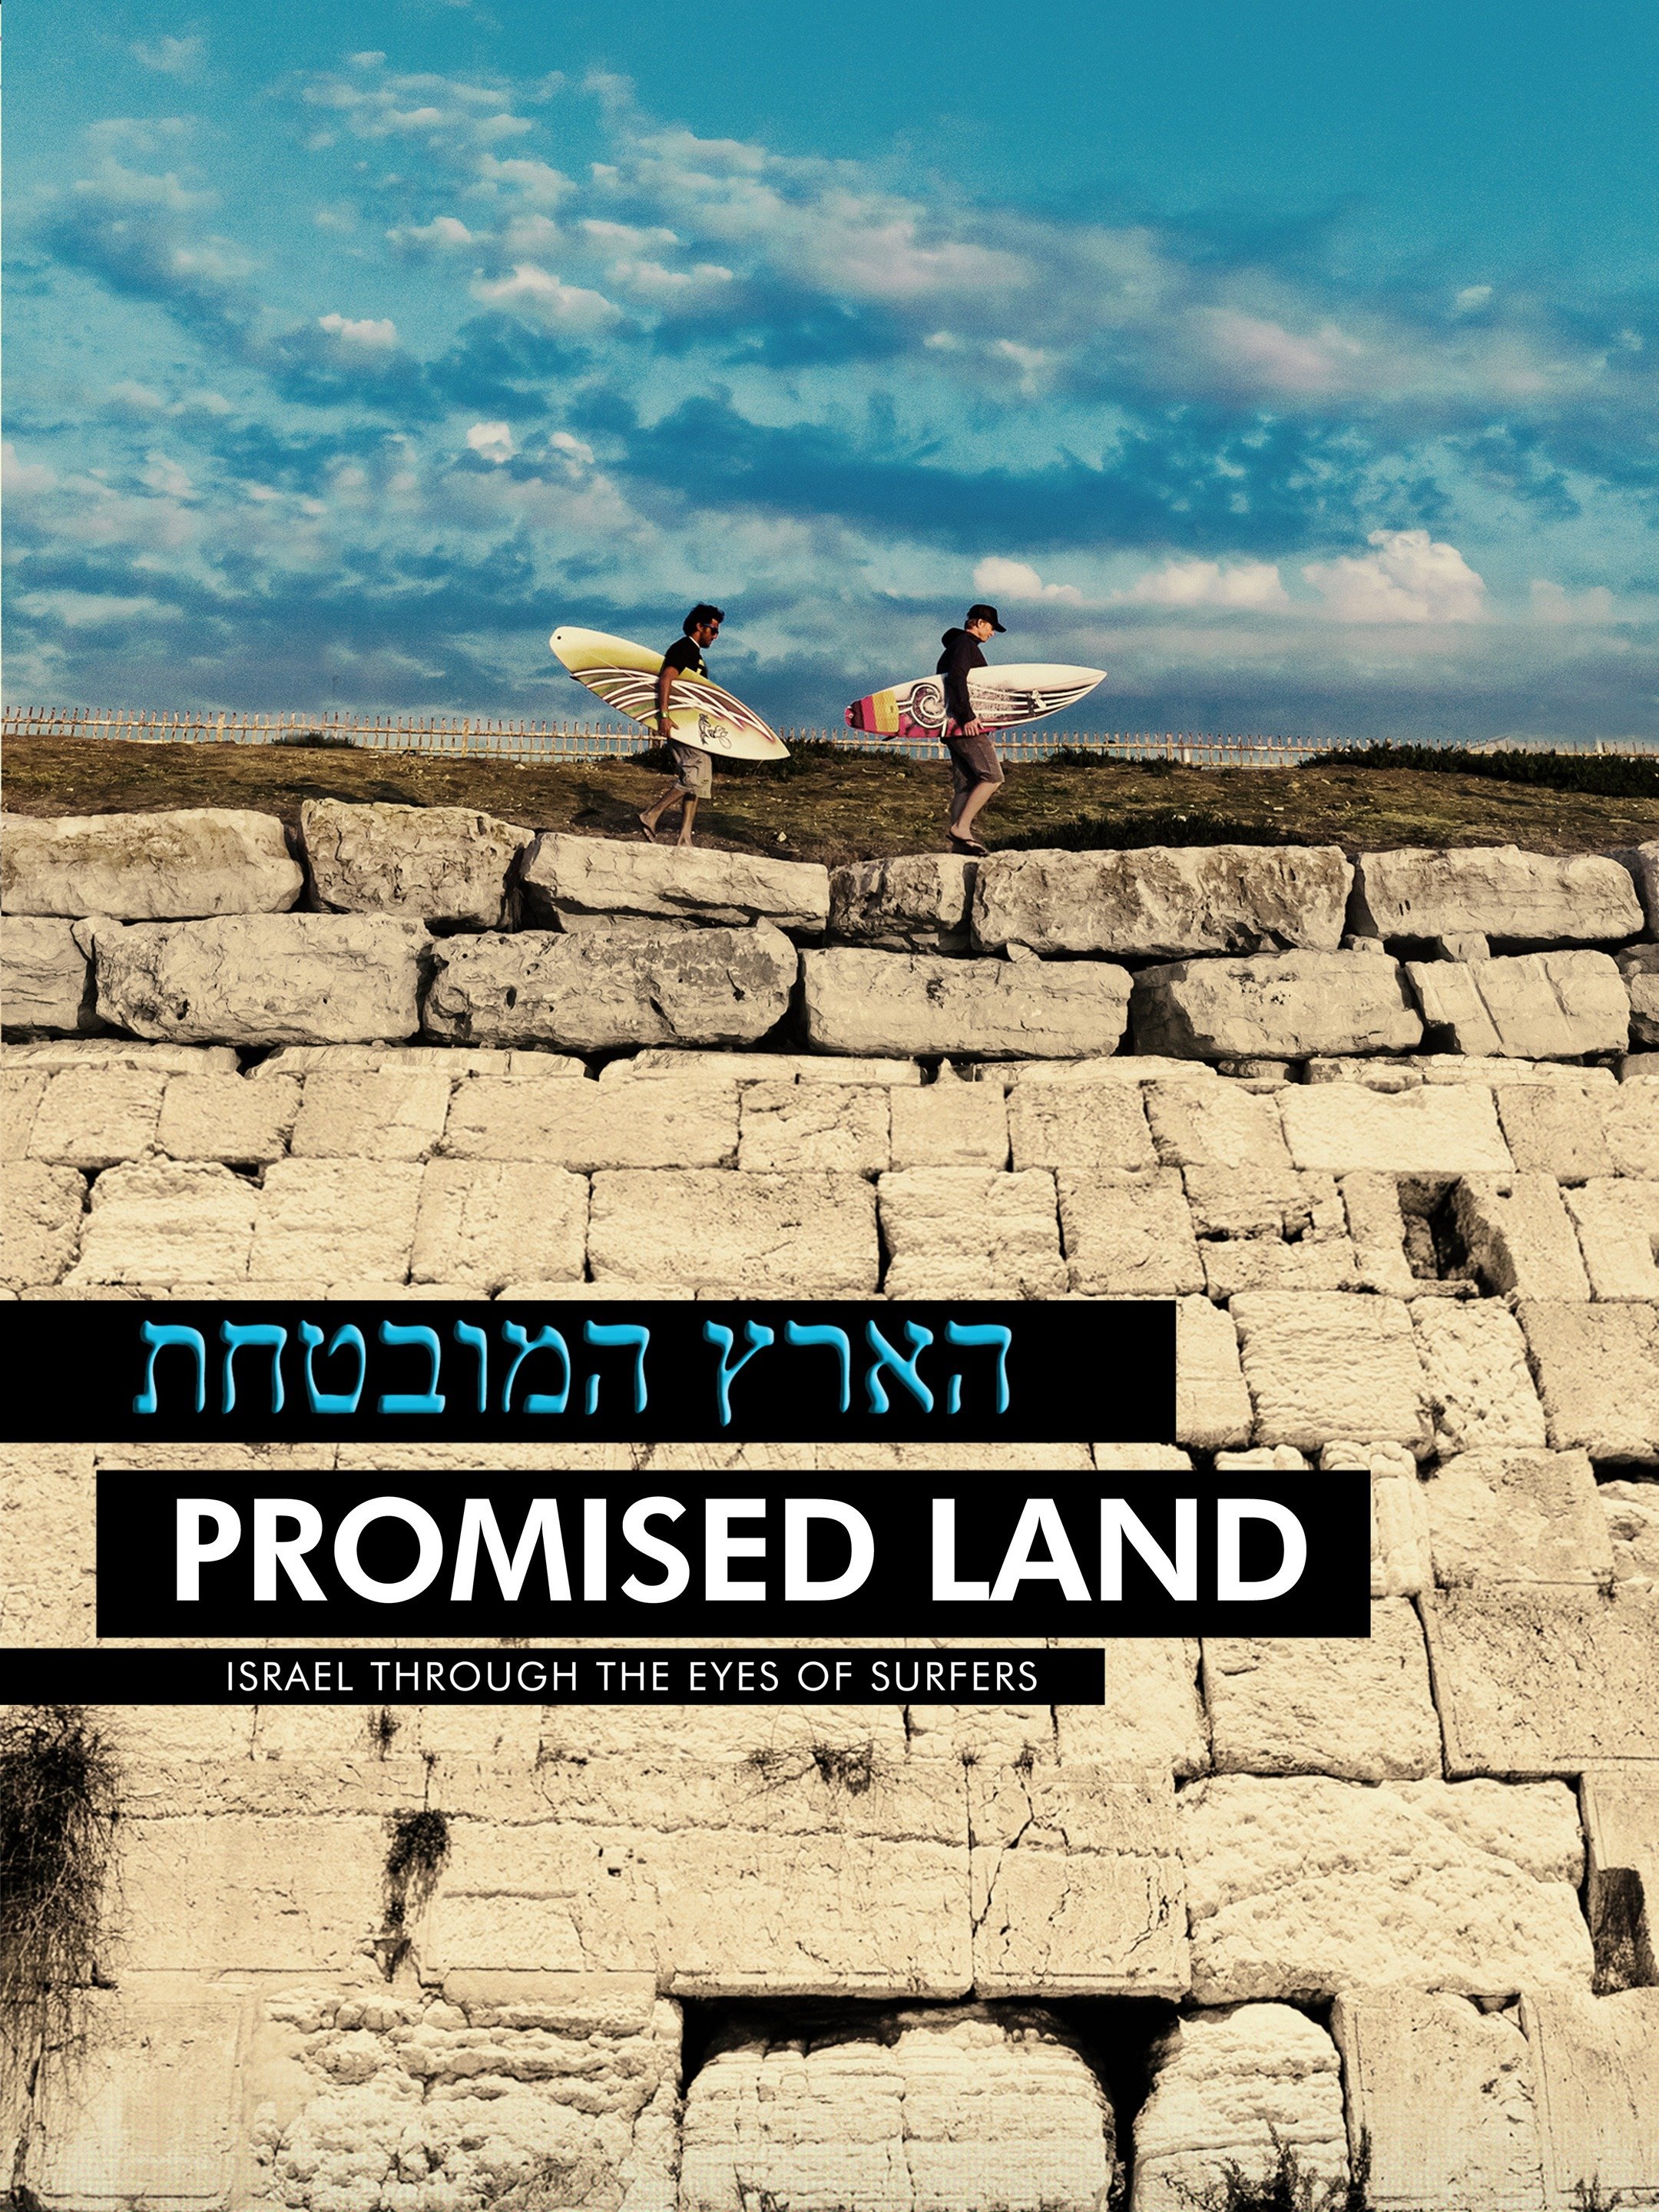 The Promised Land - Rotten Tomatoes